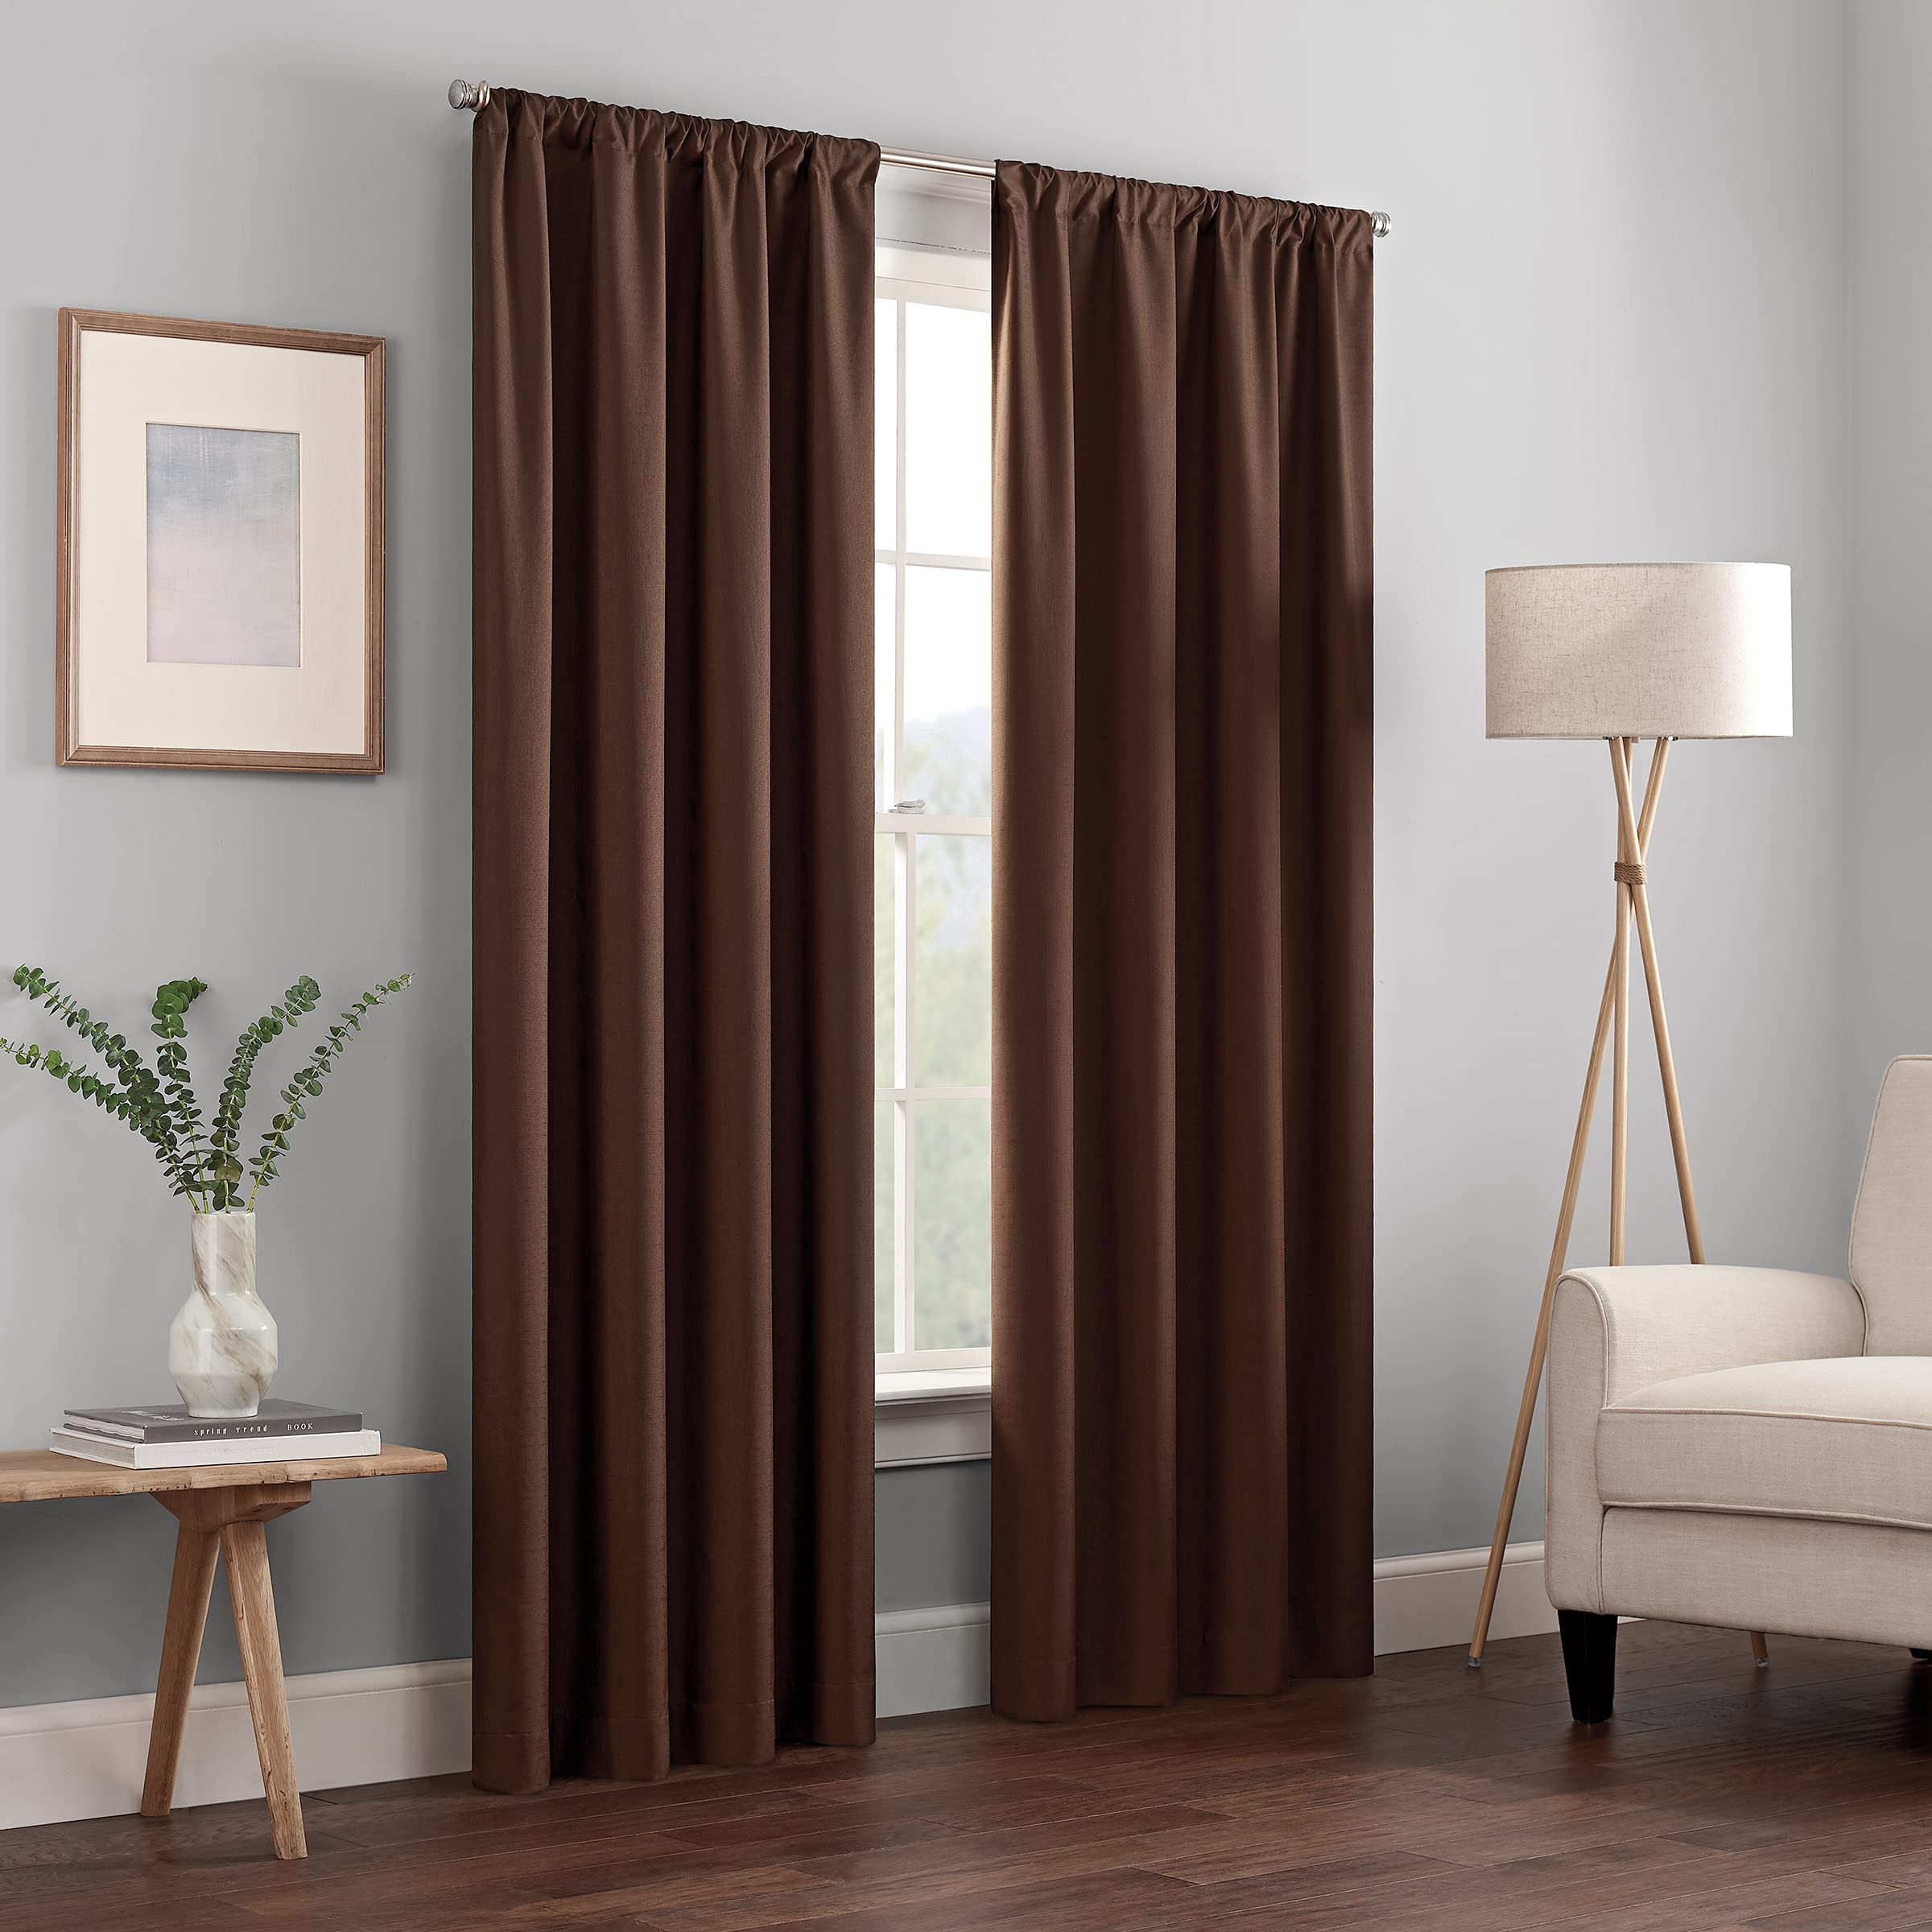 Eclipse Gum ECLIPSE Kendall Modern Blackout Thermal Rod Pocket Window Curtain for Bedroom or Living Room (1 Panel), 42 X 63, Chocolate